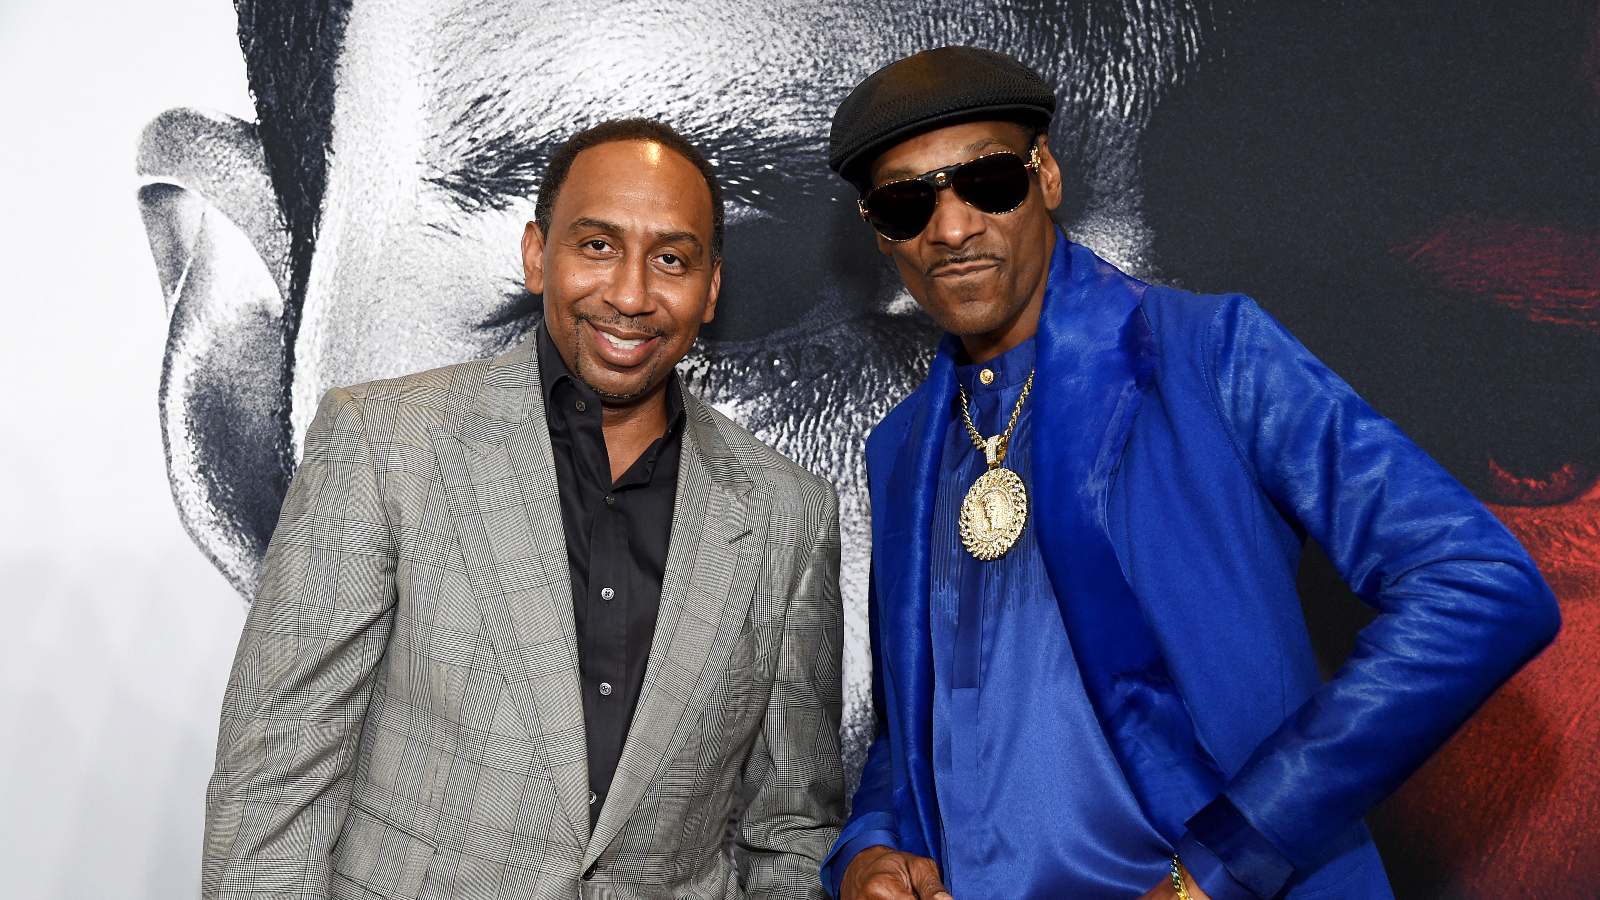 Snoop Dogg Brutally Roasts Stephen A. Smith Over Horrific First Pitch At Yankees Game #SnoopDogg